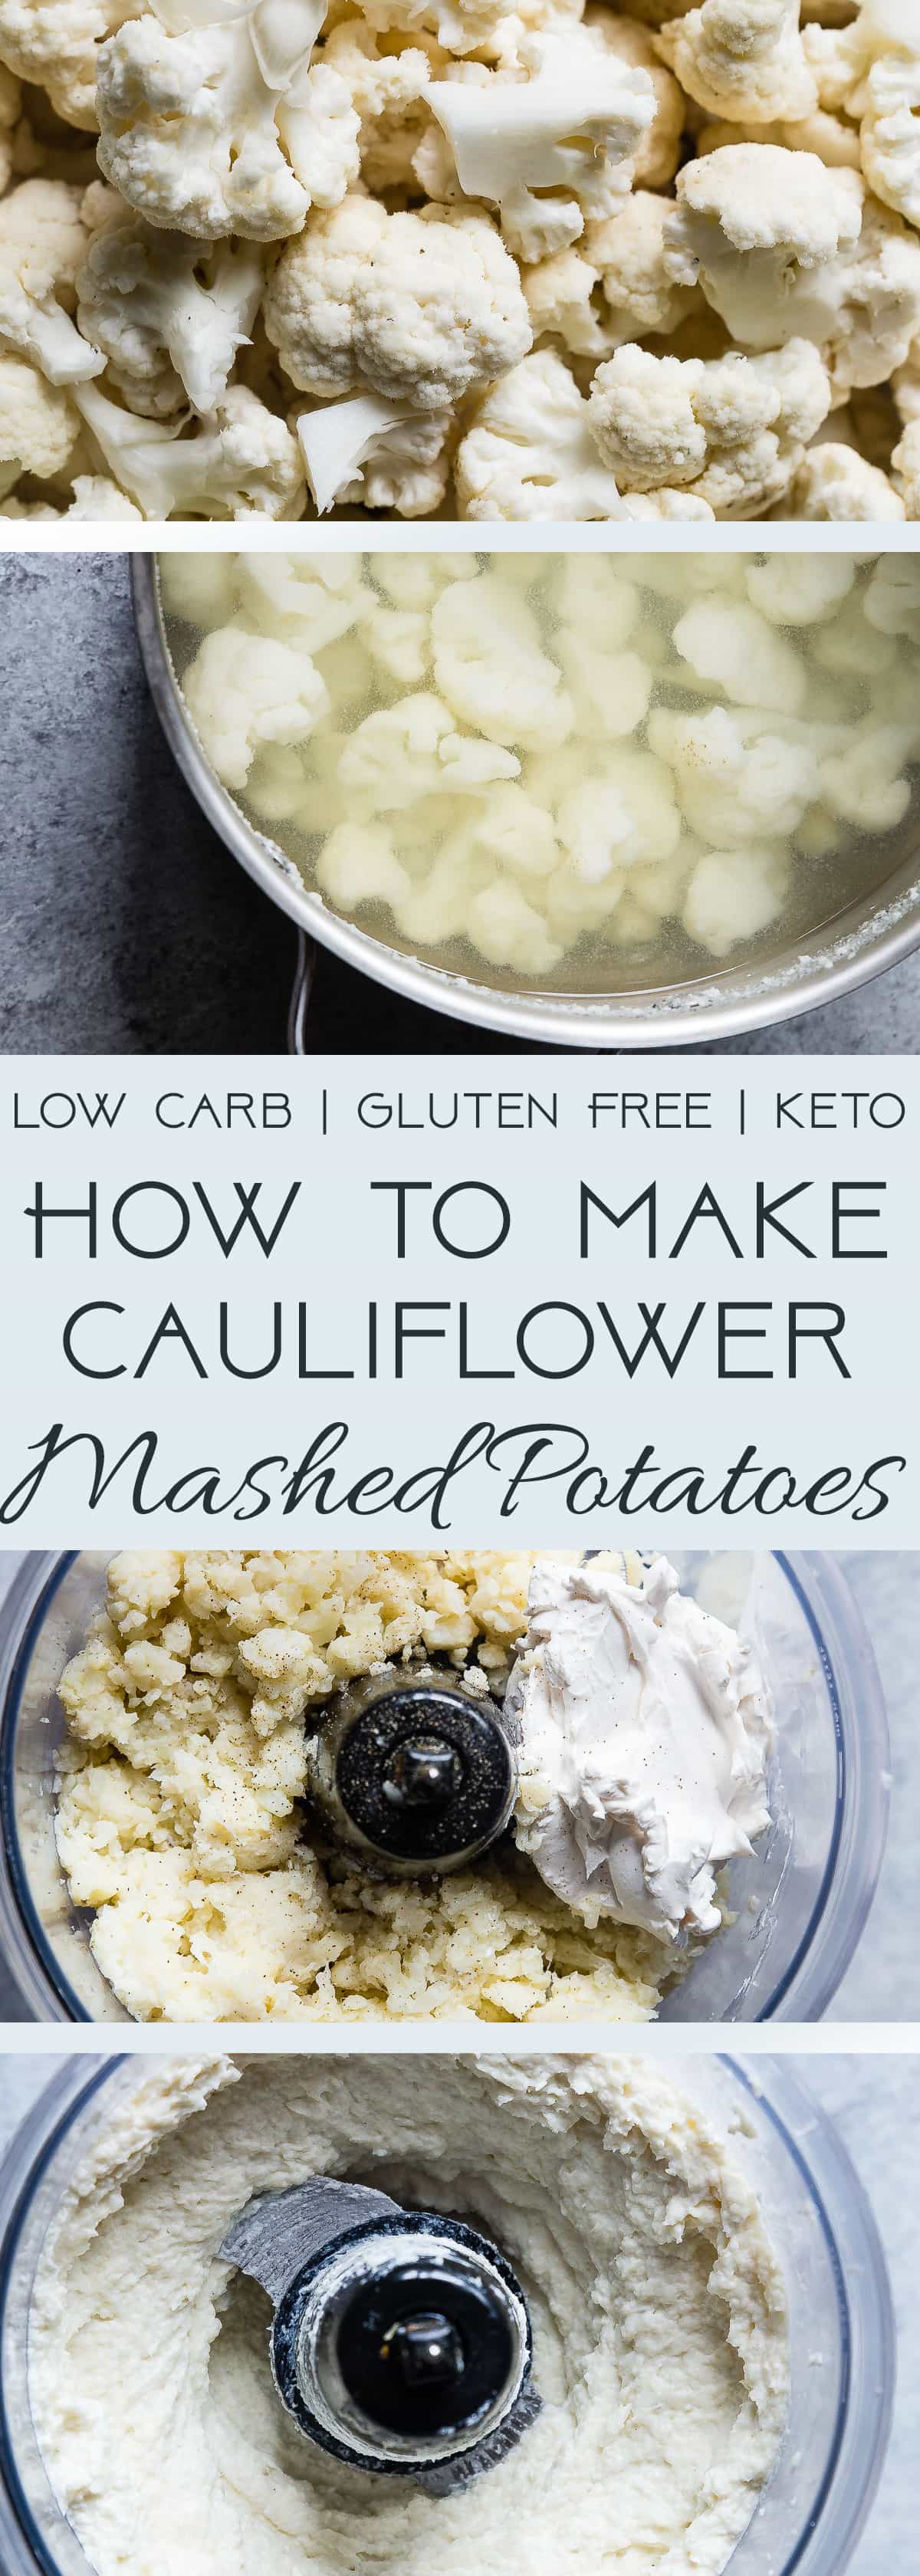 How To Make Cauliflower Mashed Potatoes - An easy, step-by-step guide with photos that shows you how to make mashed cauliflower, that tastes like mashed potatoes, but are keto, low carb, gluten free and healthy! | Foodfaithfitness.com | @FoodfaithFit | vegan cauliflower mashed potatoes. keto cauliflower mashed potatoes. healthy thanksgiving recipes. healthy thanksgiving side dishes. healthy cauliflower recipes. low carb cauliflower recipes. weight watchers cauliflower mashed potatoes